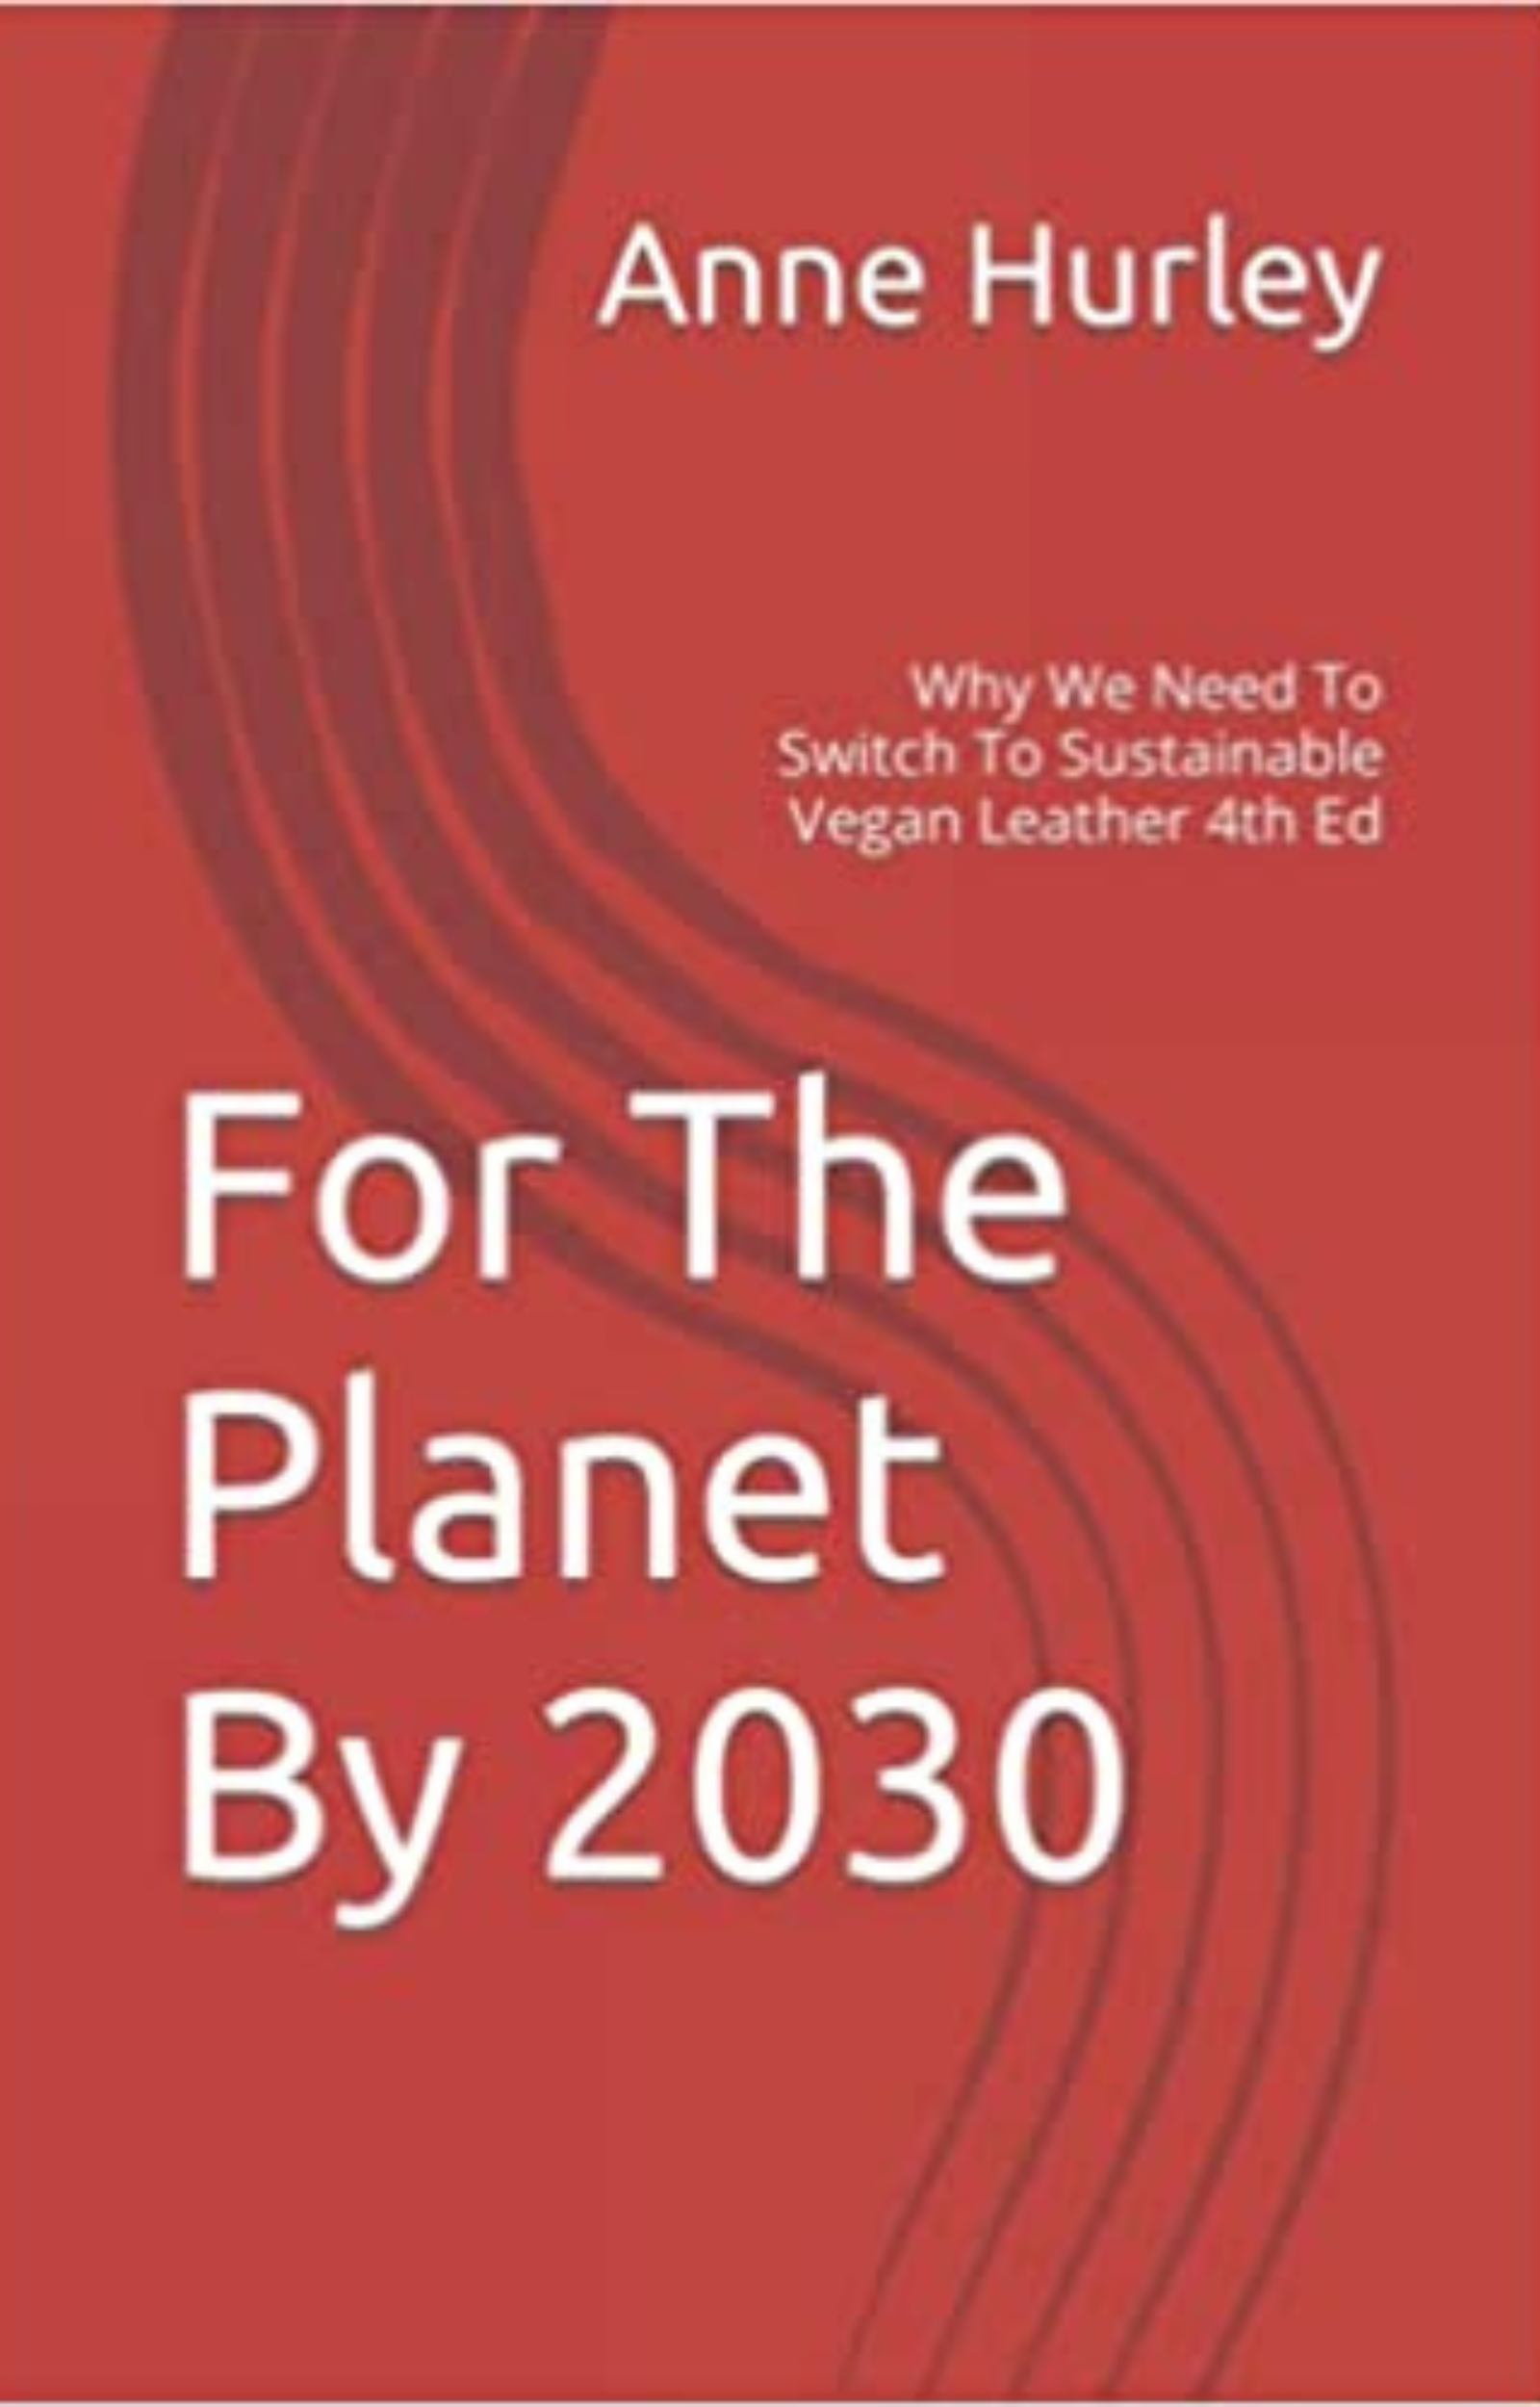 For The Planet By 2030 book by Anne Hurley